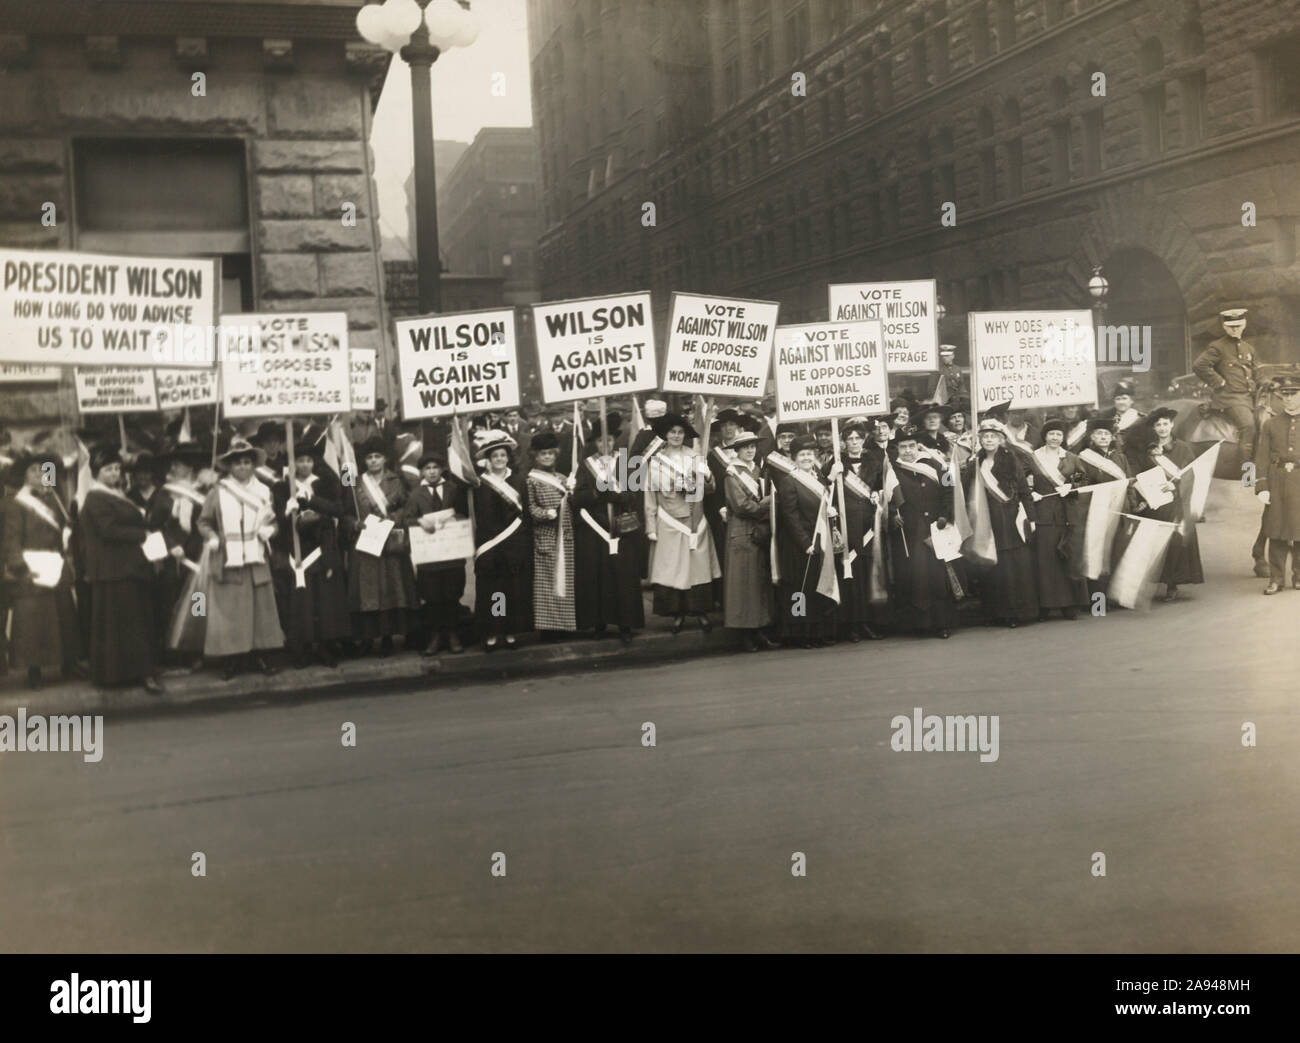 Suffragists Protest U.S. President Woodrow Wilson's Opposition to Woman Suffrage, Chicago, Illinois, USA, Photograph by Burke & Atwell, October 1916 Stock Photo